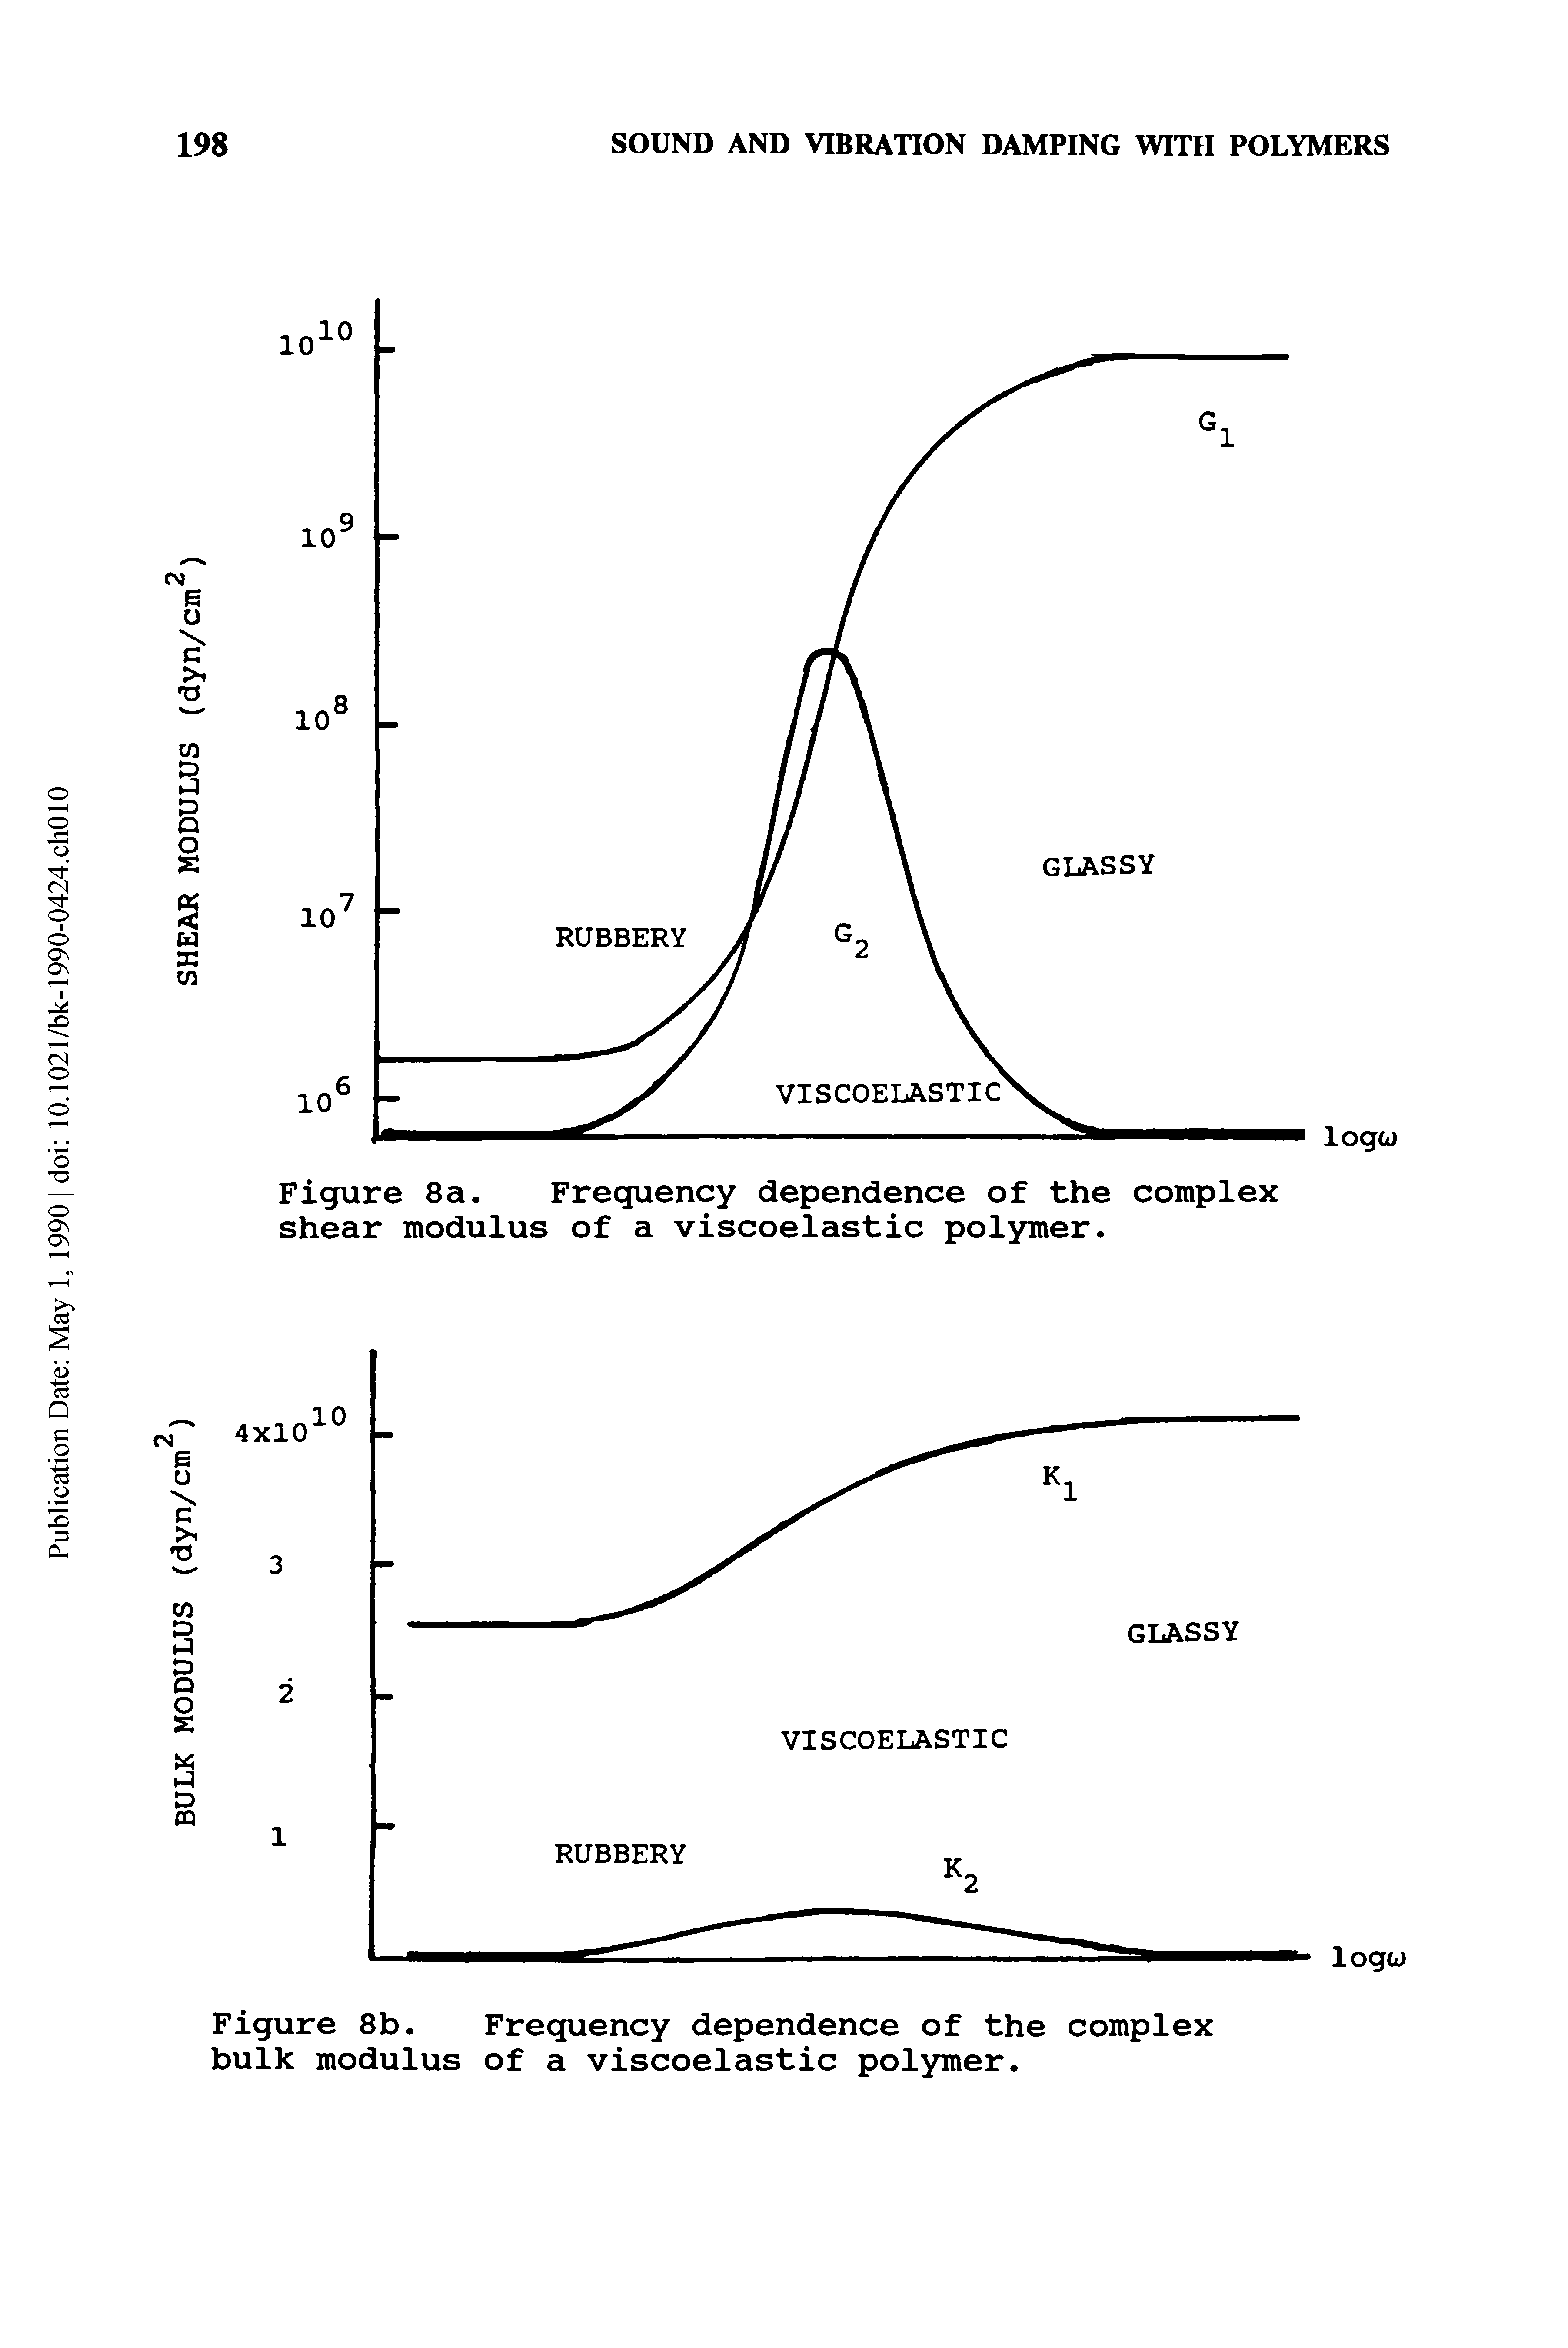 Figure 8b. Frequency dependence of the complex bulk modulus of a viscoelastic polymer.